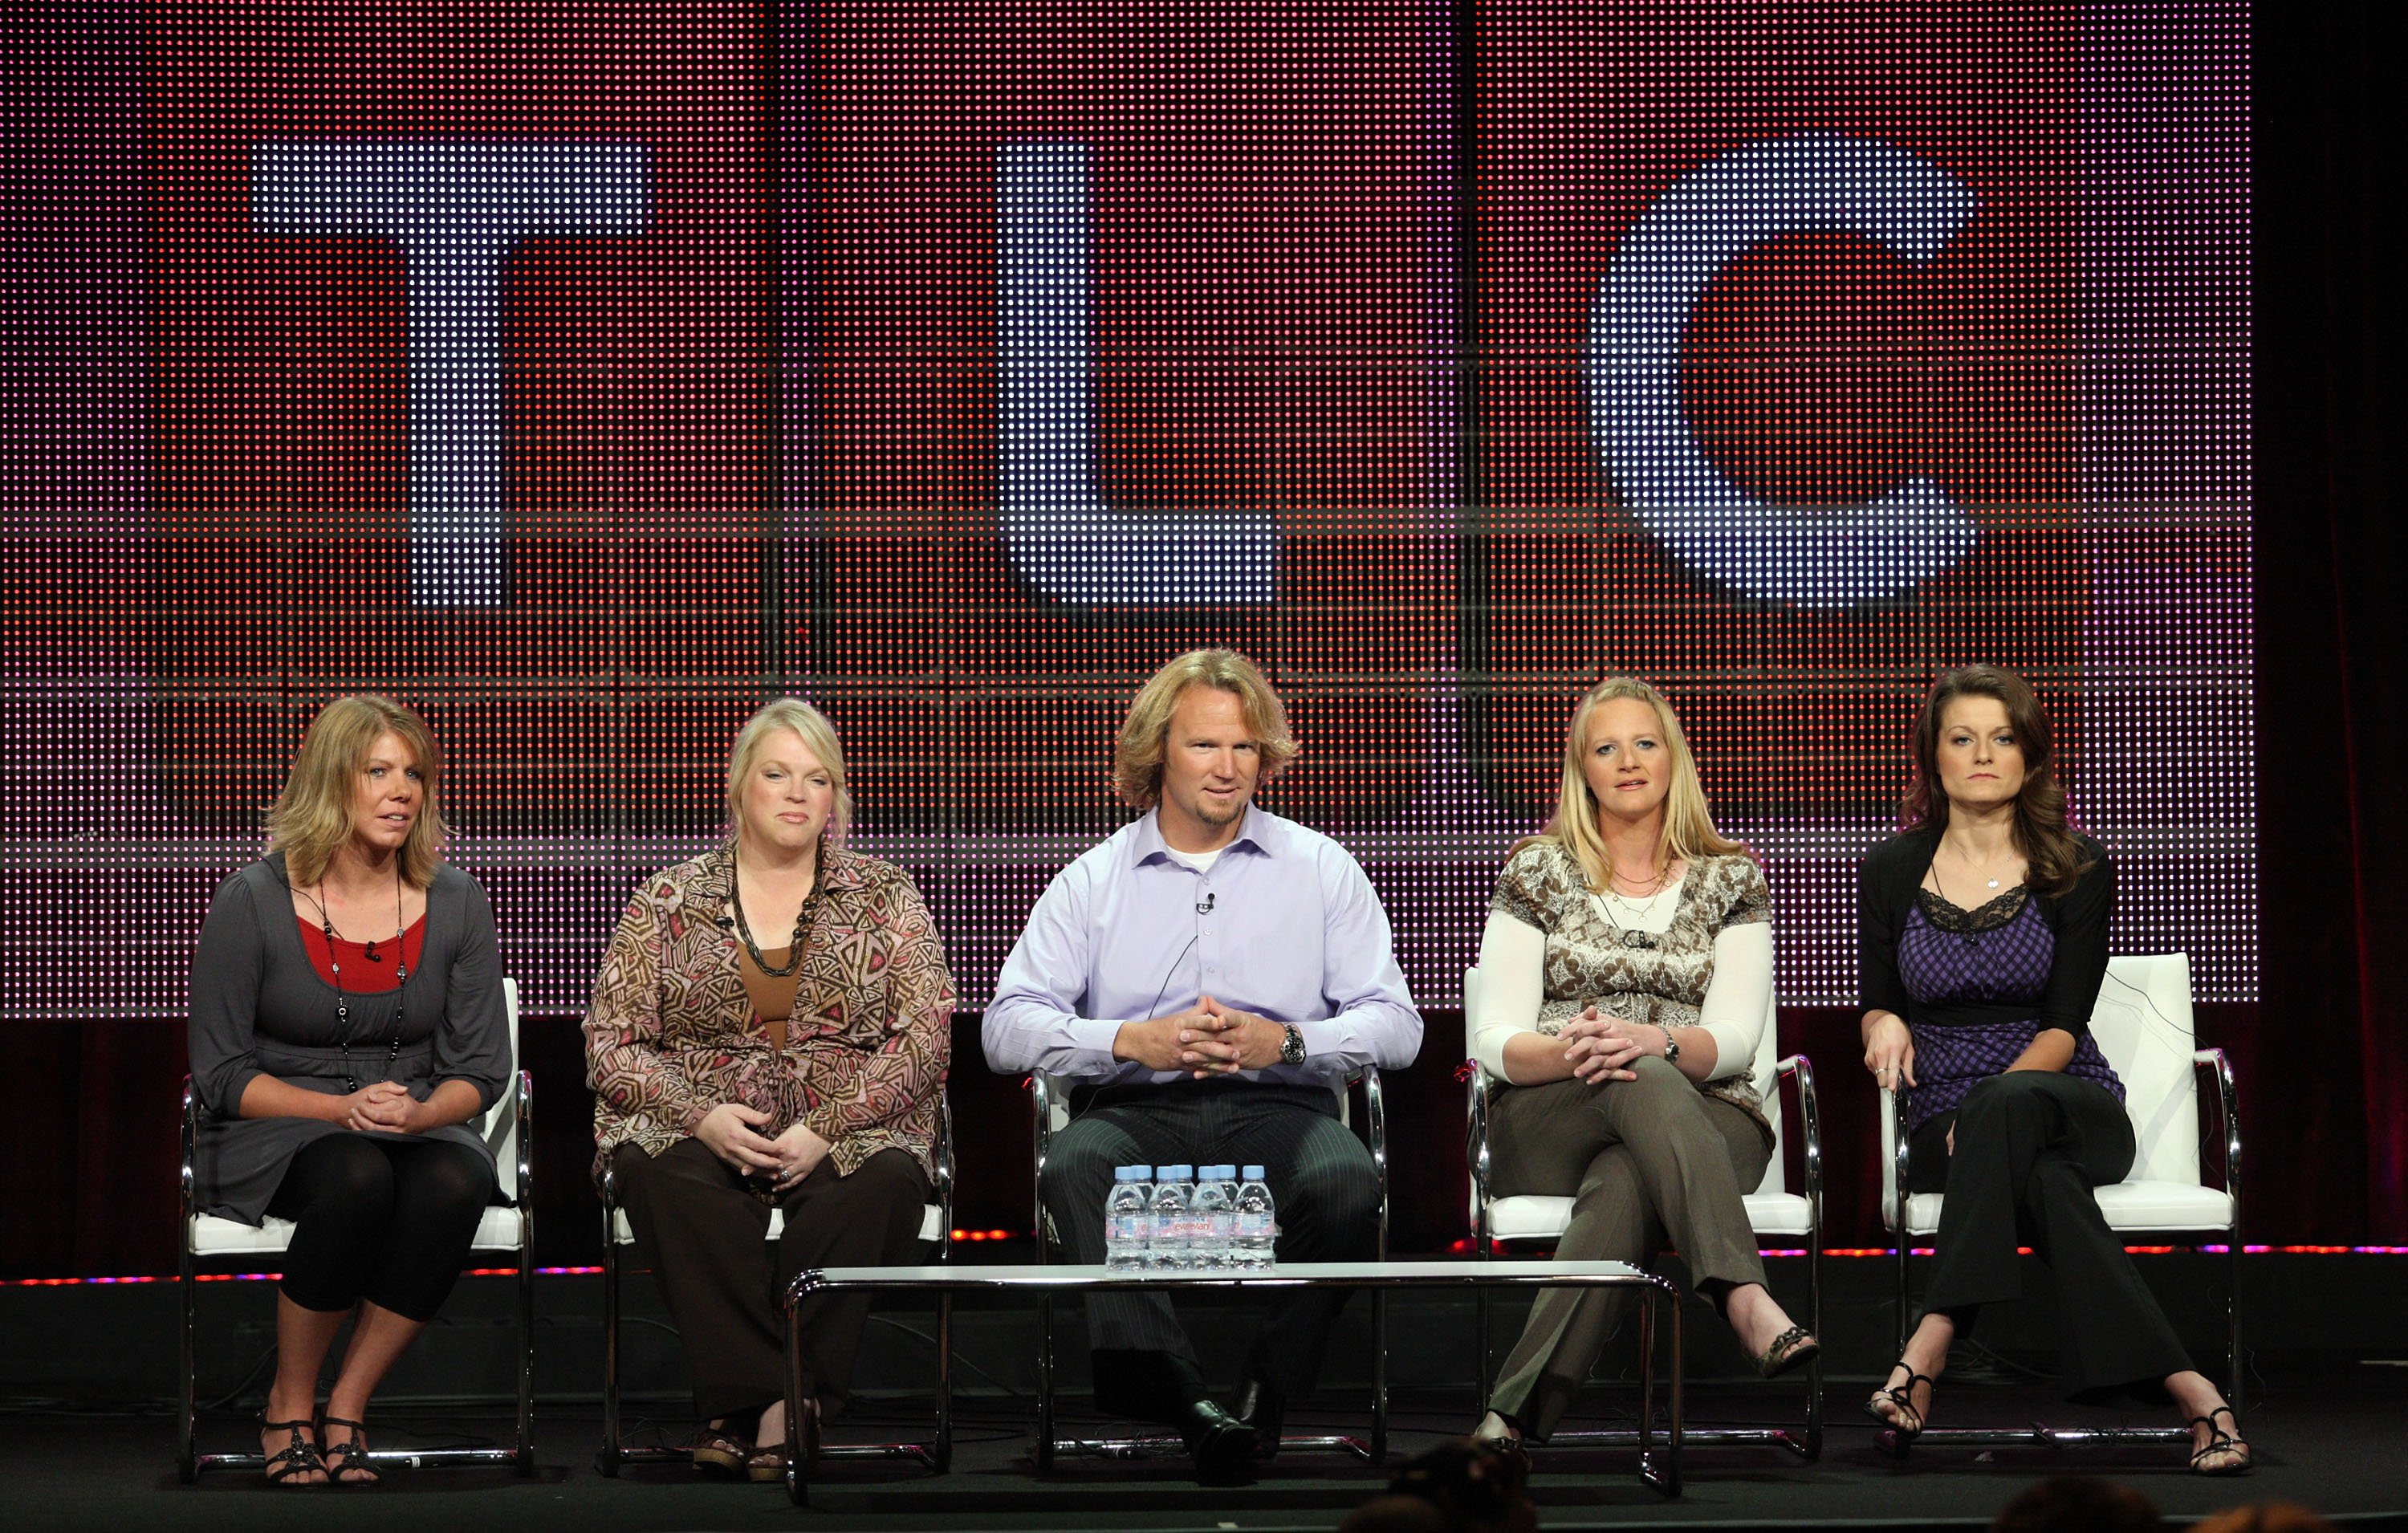 ‘Sister Wives’ Fans Think 1 Change Would Make the Tell-All Episodes Better Moving Forward